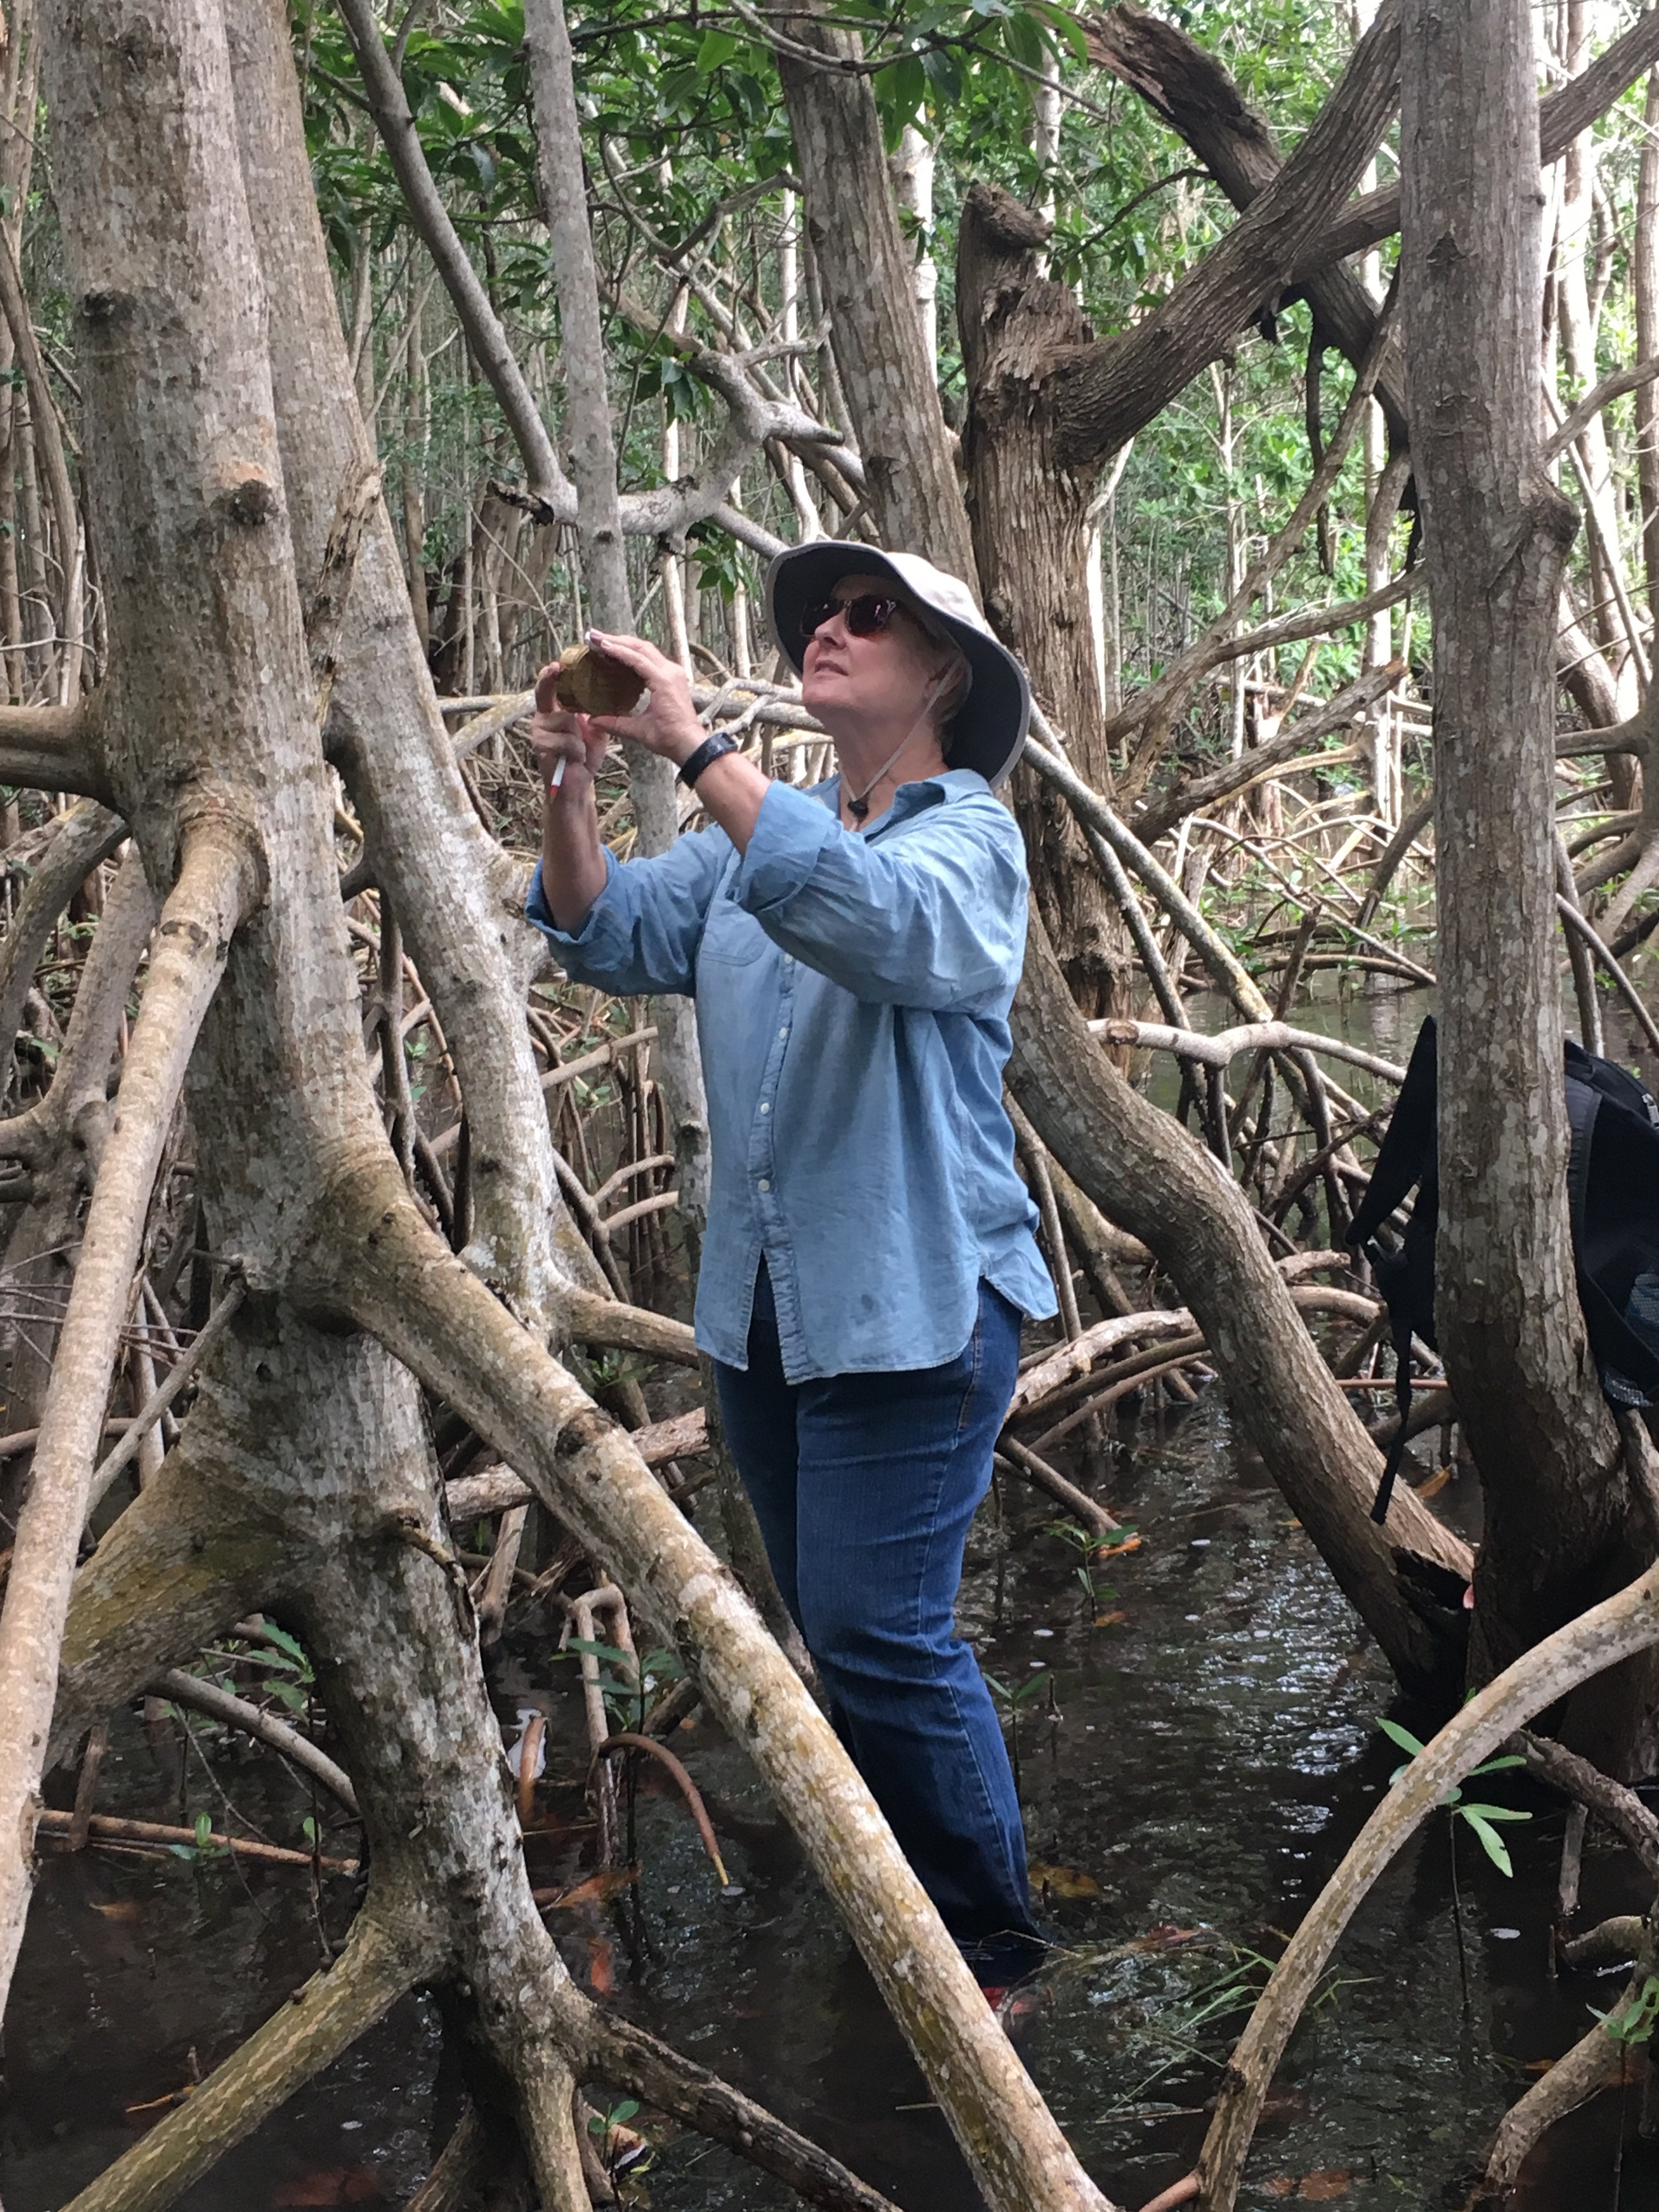 Cathy Laroche (FCE LTER RET, Felix Varela High School) measuring the heights of mangrove trees in Biscayne National Park.